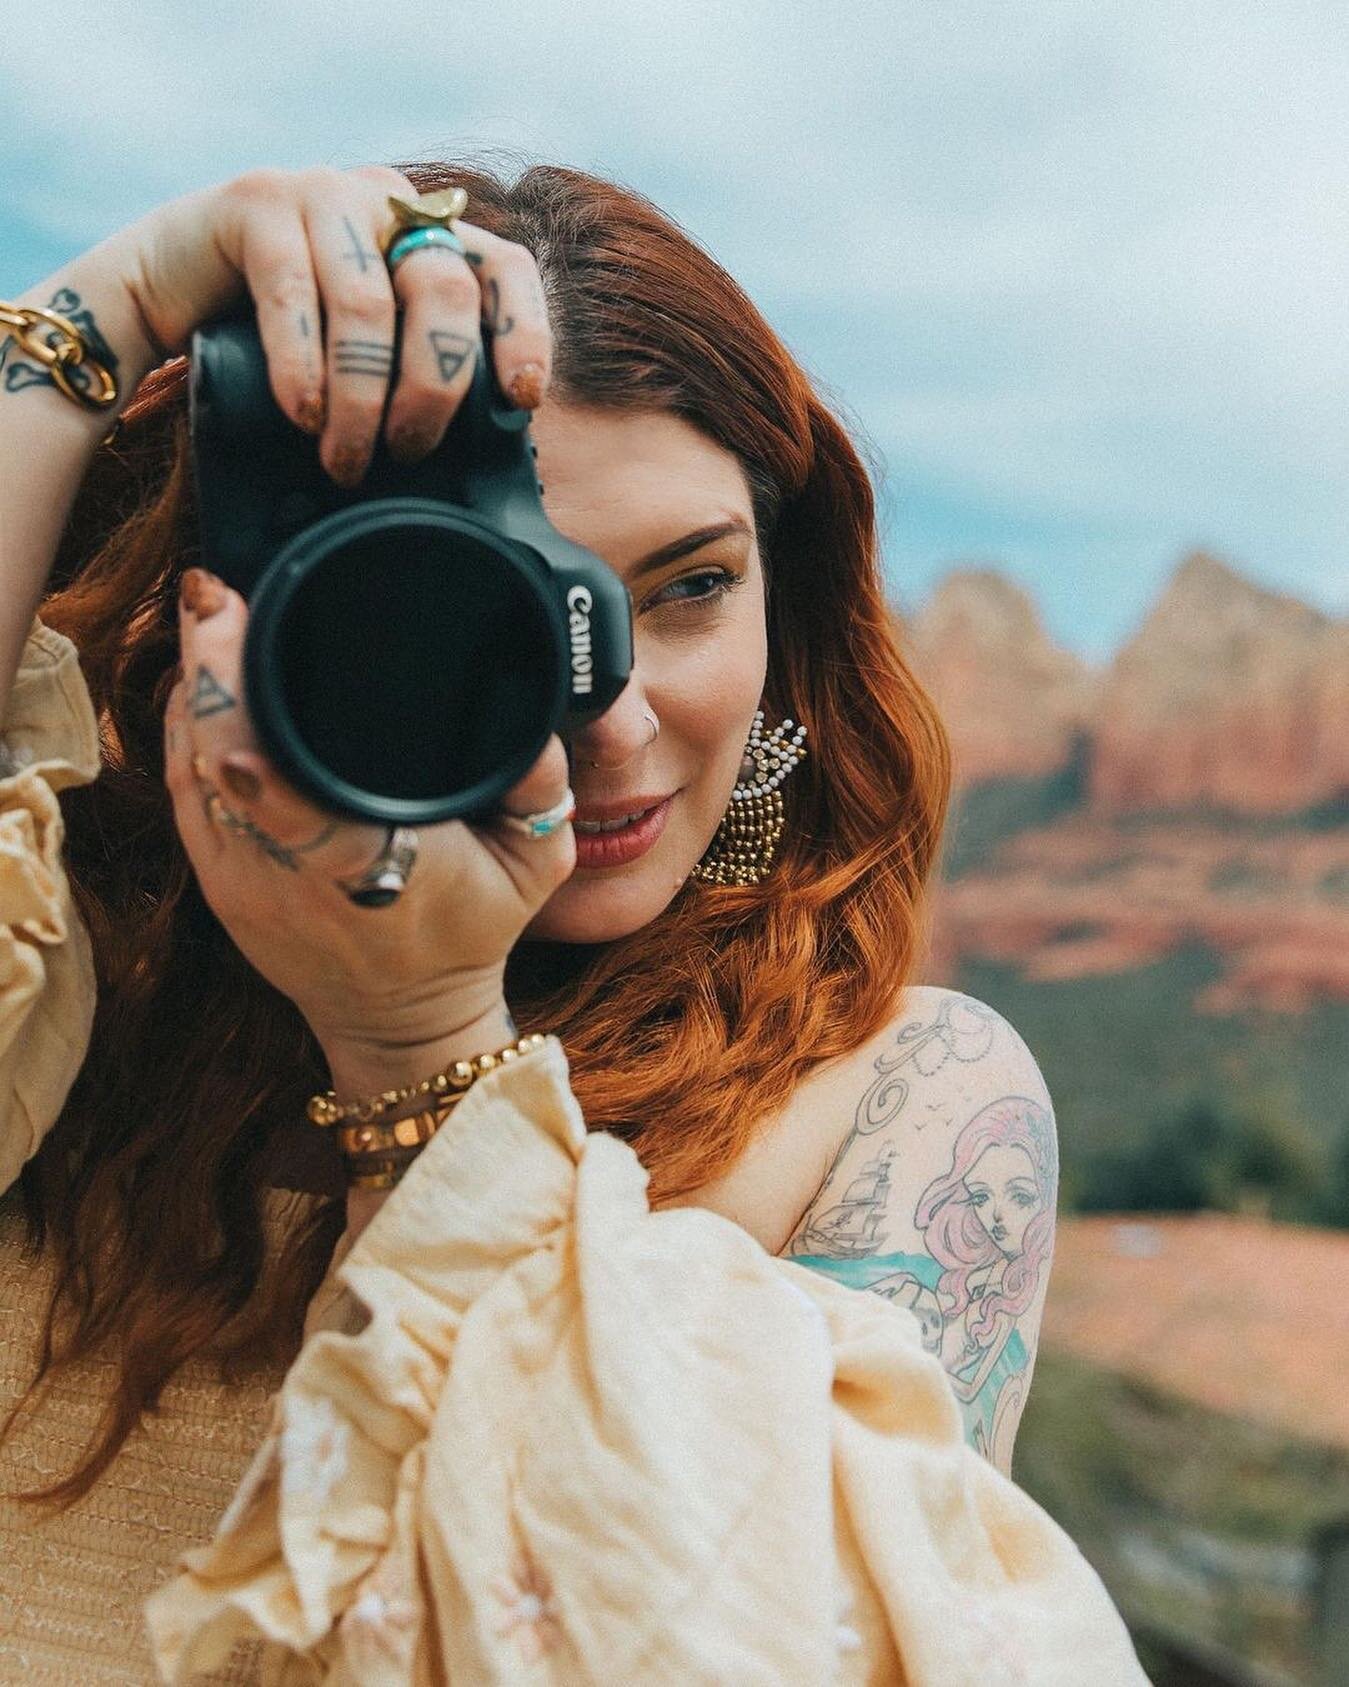 &ldquo;Step into your purpose with intention and you cannot go wrong&rdquo; ⚡️

&mdash; @jessicaleigh.co doing what she loves with @elementsphotoworkshop at our Sedona flagship Destination Home! #CreatorsCreate

Share your Creator Story &mdash; link 